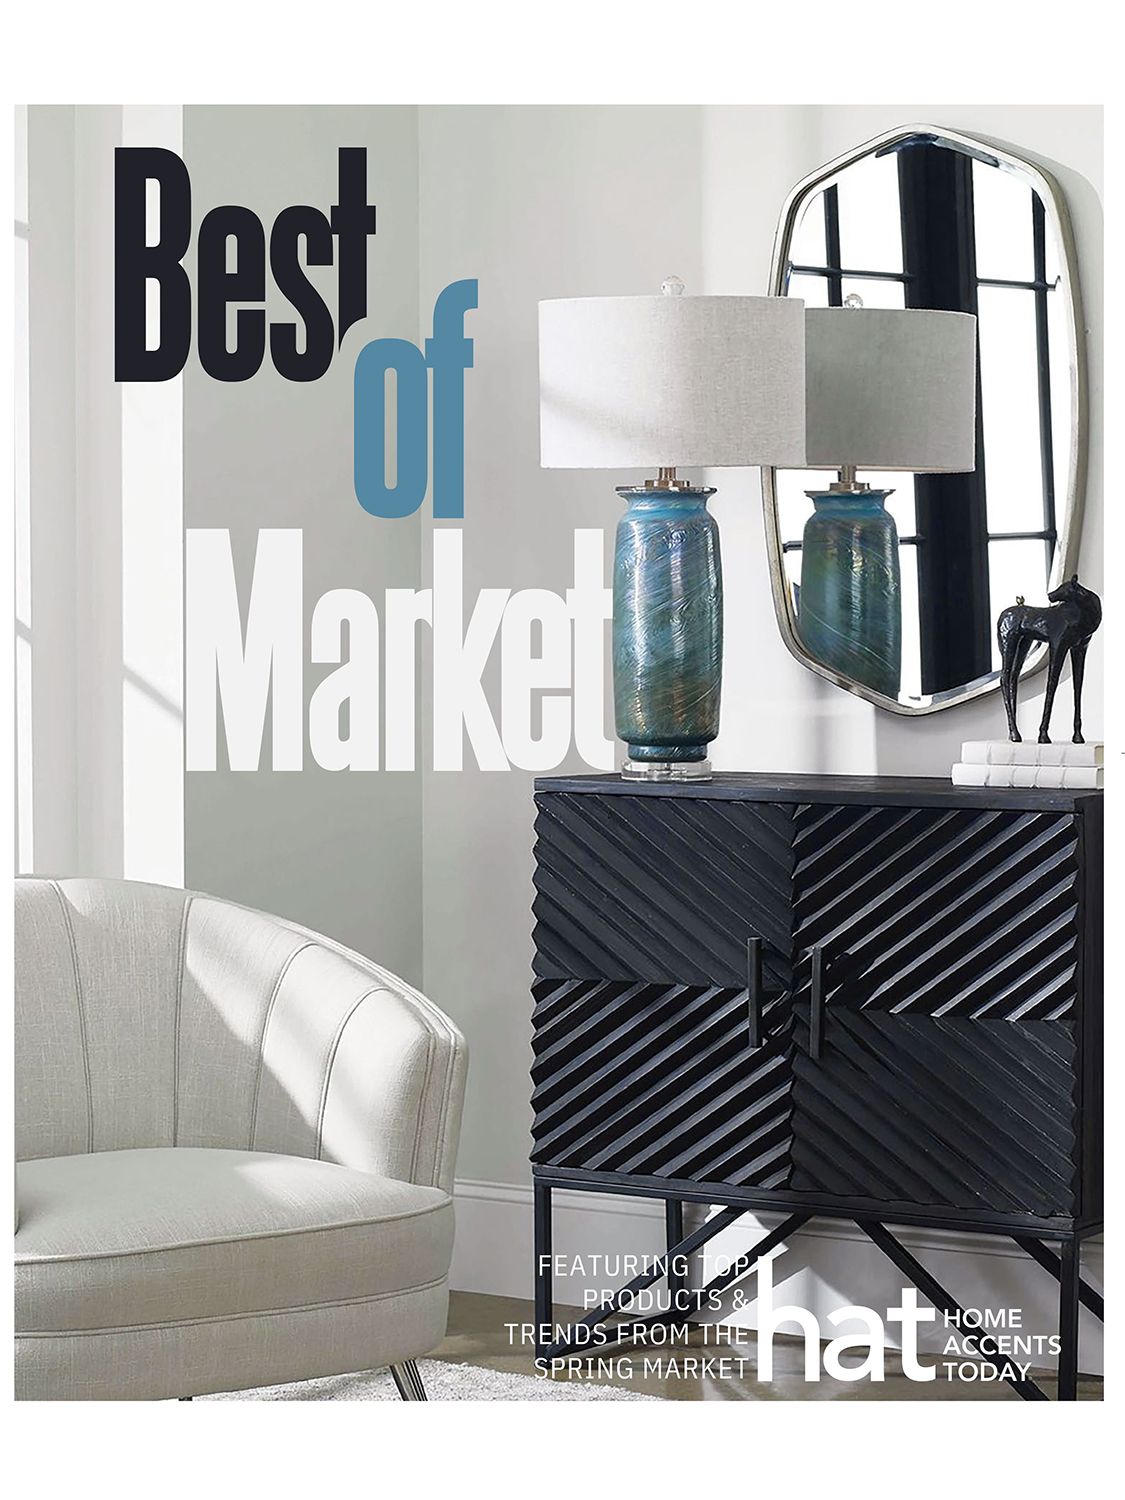 Home Accents Today - Best of Market